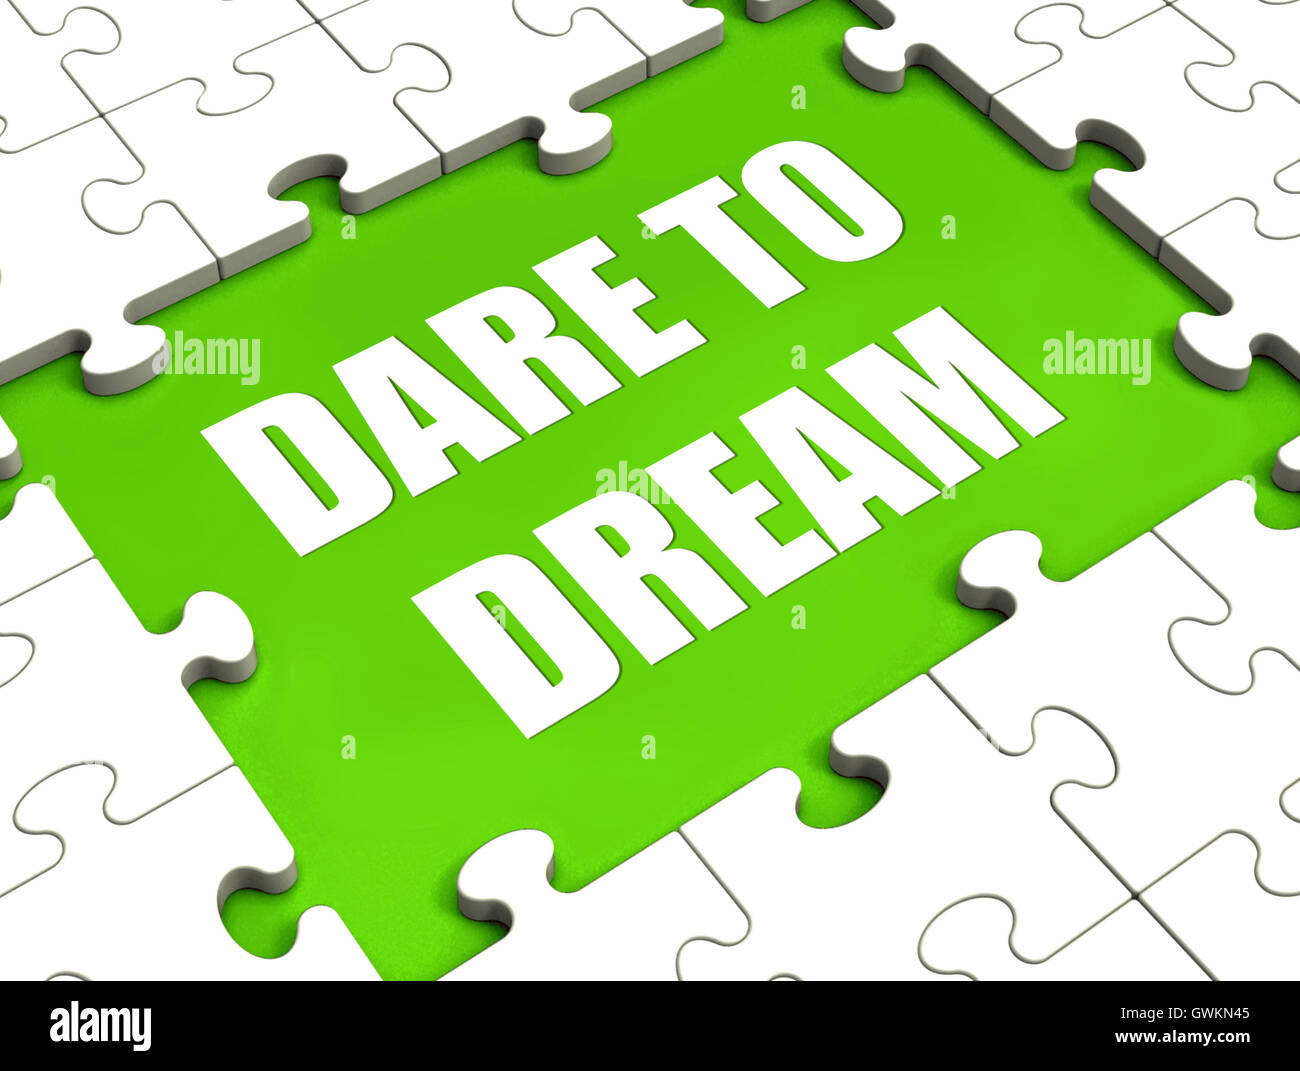 Dare To Dream Puzzle Shows Dreaming Hope And Imagination Stock Photo